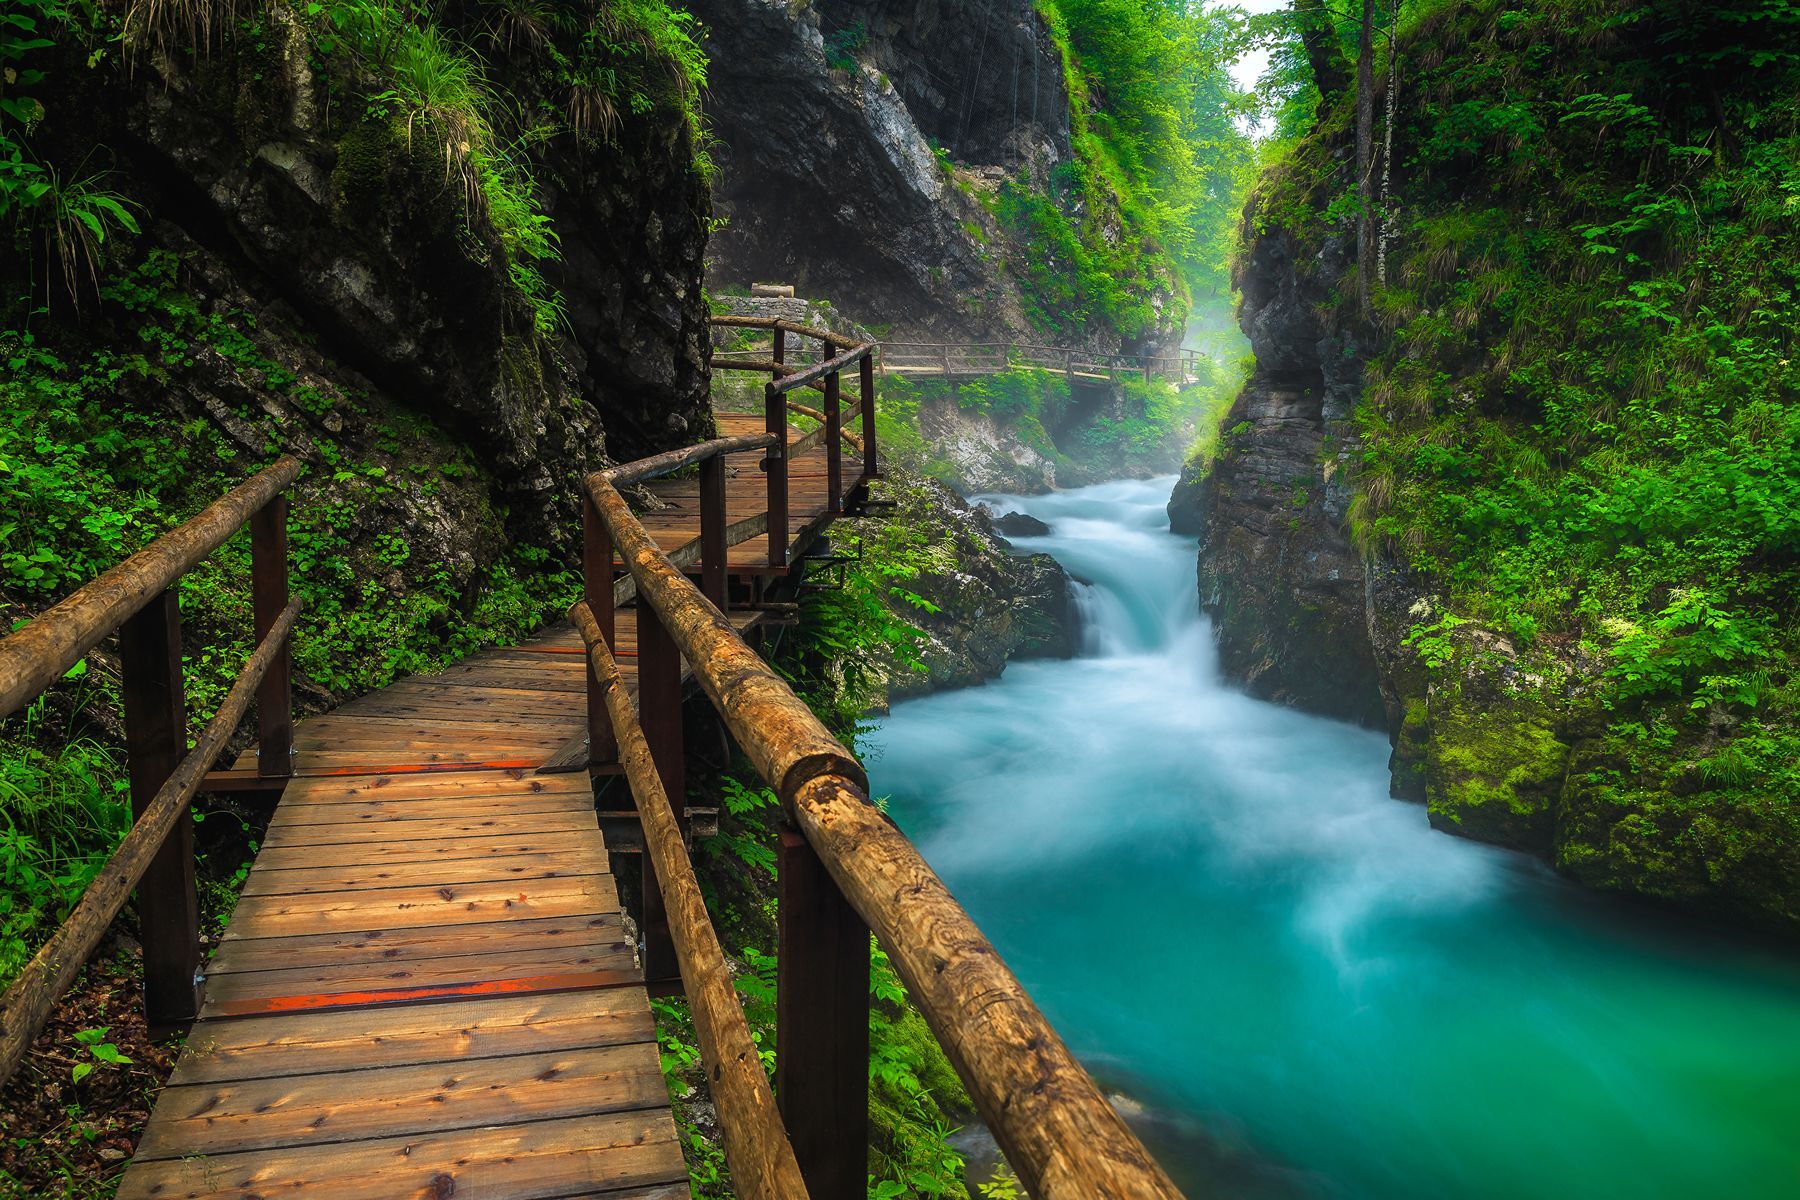 <p>Located near Bled, the <a href="https://www.vintgar.si/en/" rel="noreferrer noopener">Vintgar Gorge</a> is a natural wonder. It’s especially enchanting from May to October, when its turquoise waters and steep cliffs covered with lush vegetation provide a serene atmosphere. Enjoy a quiet stroll on the woodland paths along the Radovna River; it’s a great way to admire the area’s spectacular waterfalls and natural pools. Nestled in the heart of Triglav National Park, this magical place is ideal for nature lovers and photographers alike.</p>